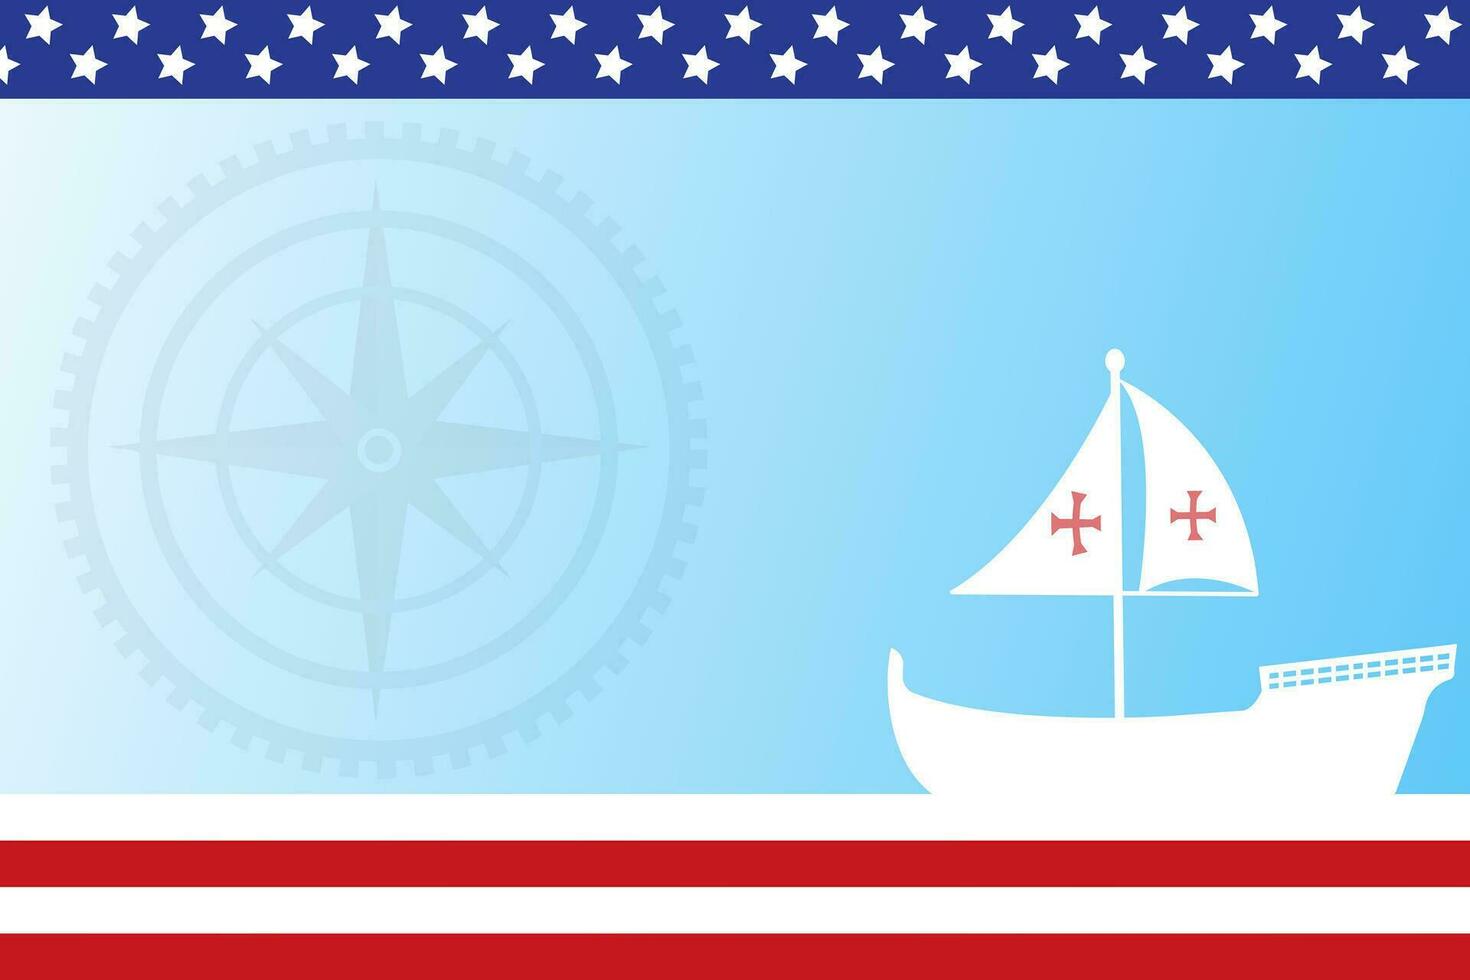 Columbus Day Copy Space Background with Sailing ship sailboat. Christopher Columbus National USA Holiday banner with American Flag, sea waves, Steer Wheel and compass. Discovery of America Spain theme vector